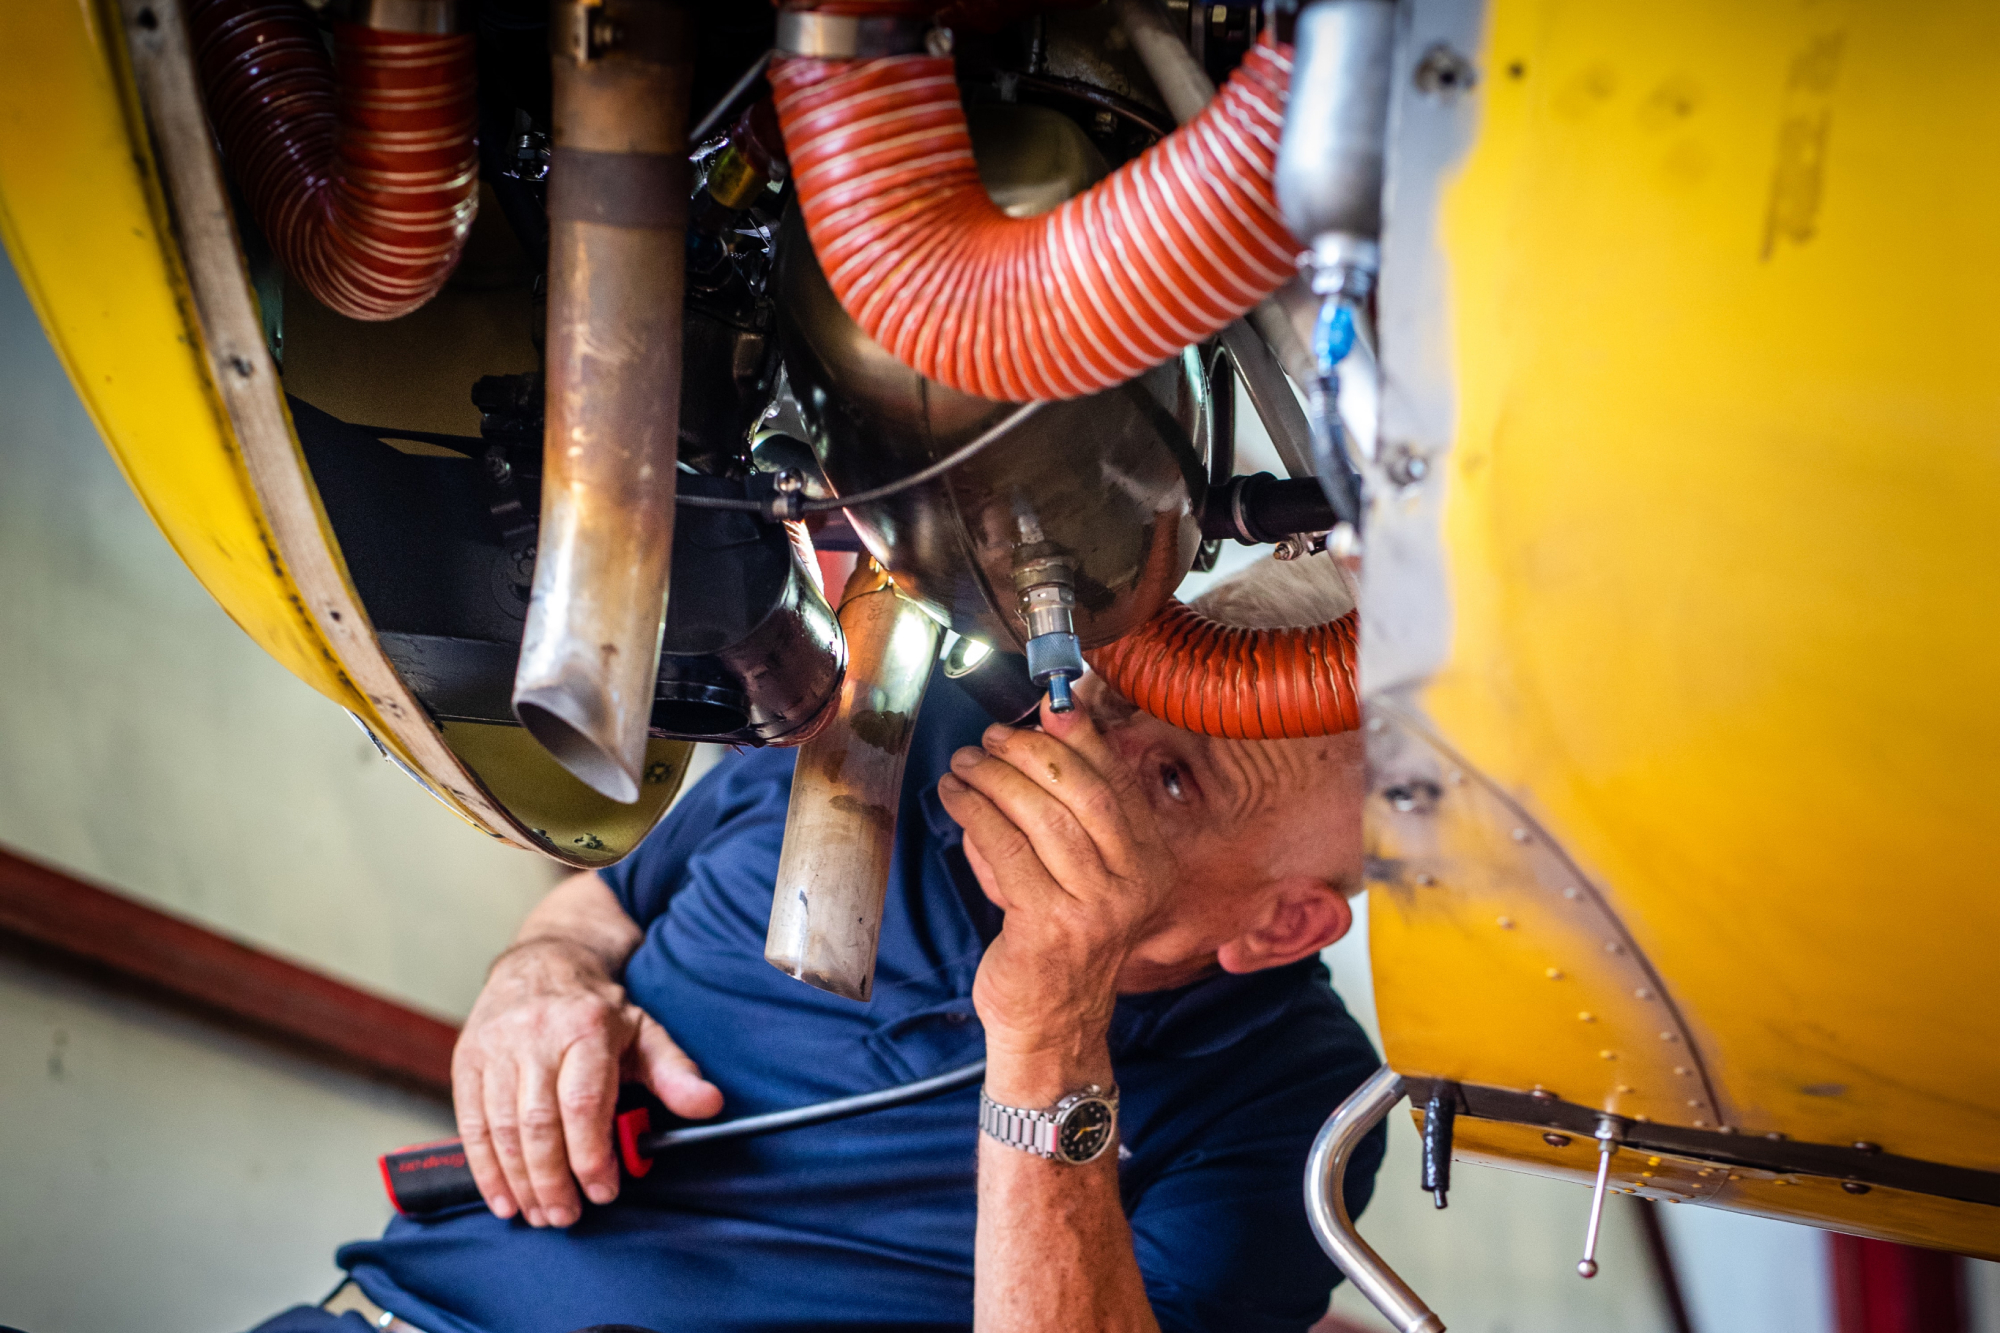 An old man repairing the engine of a plane